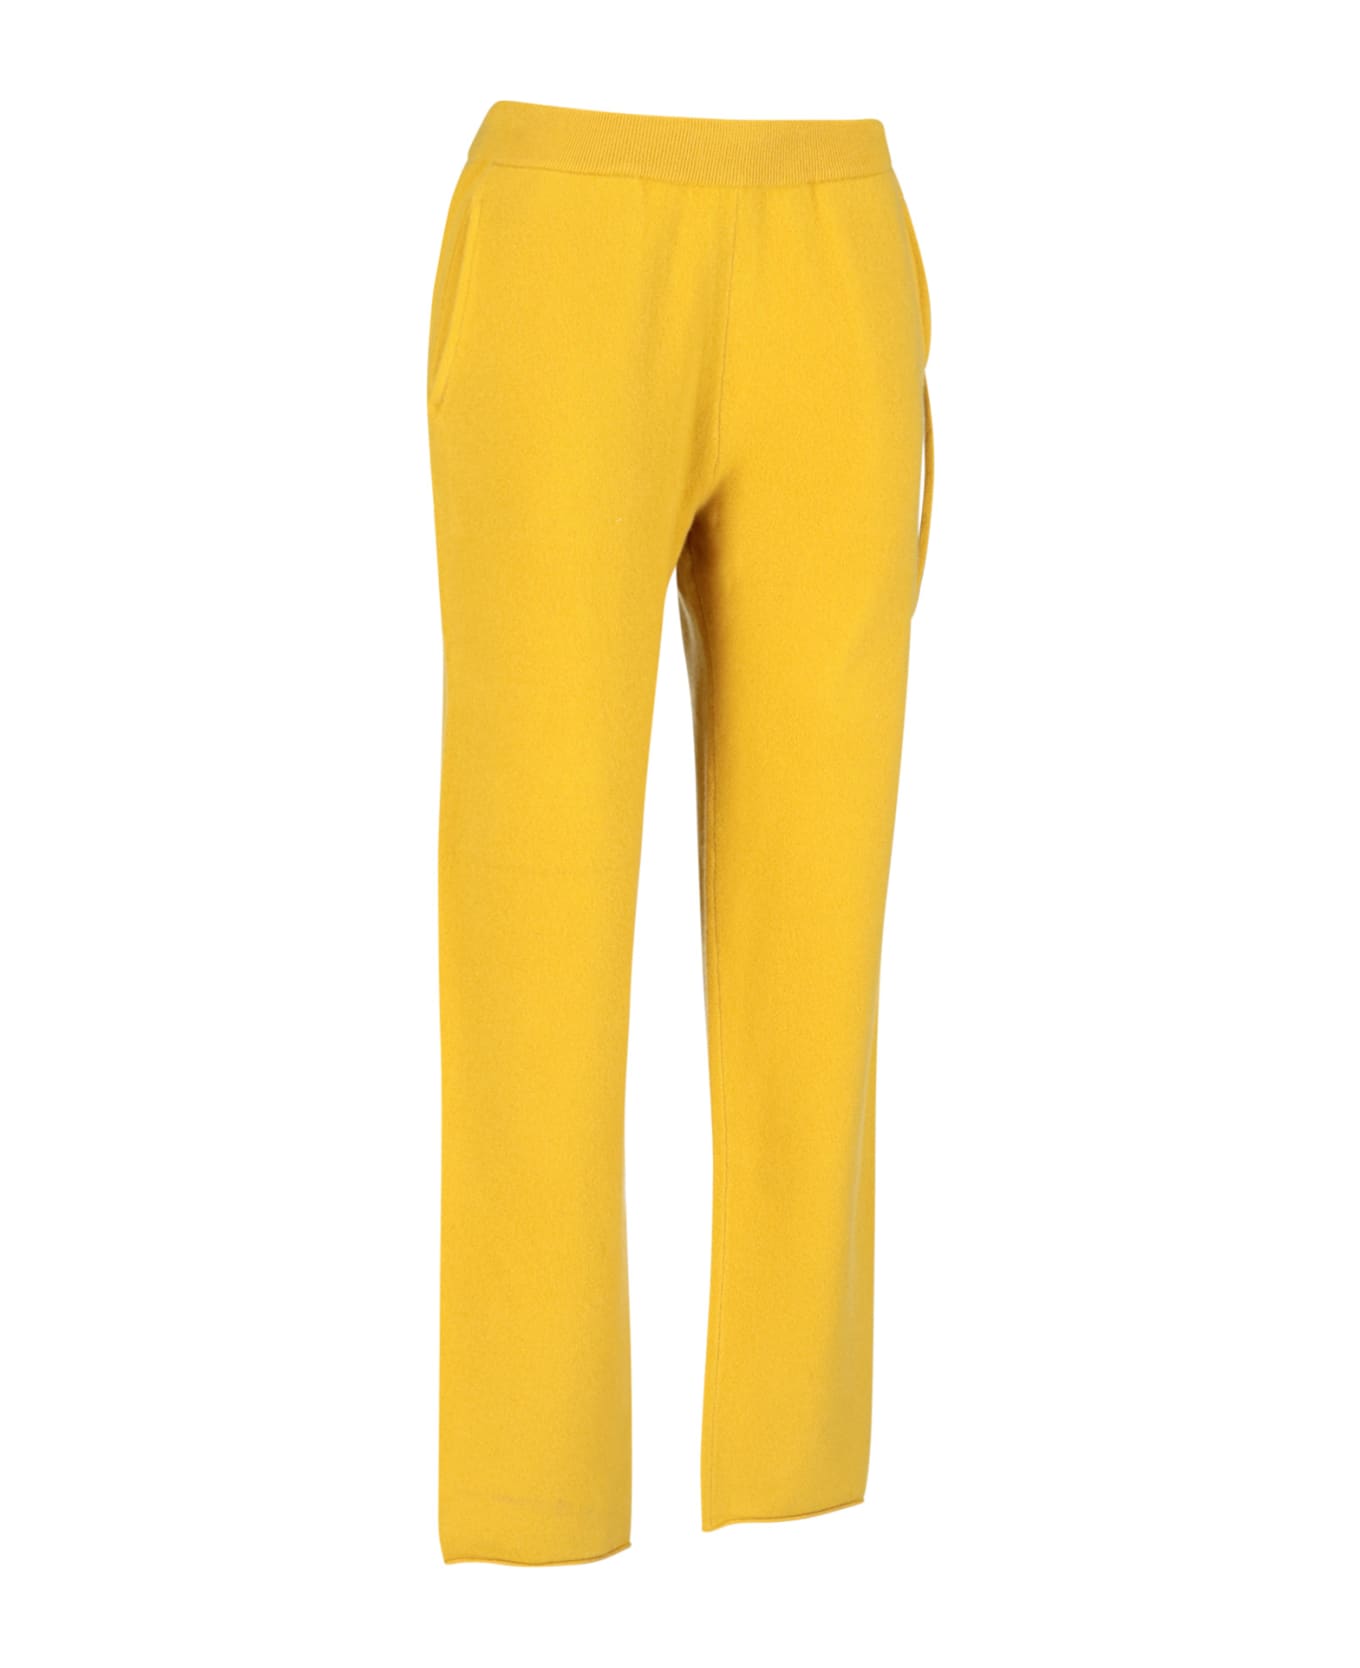 Extreme Cashmere Pants - Yellow